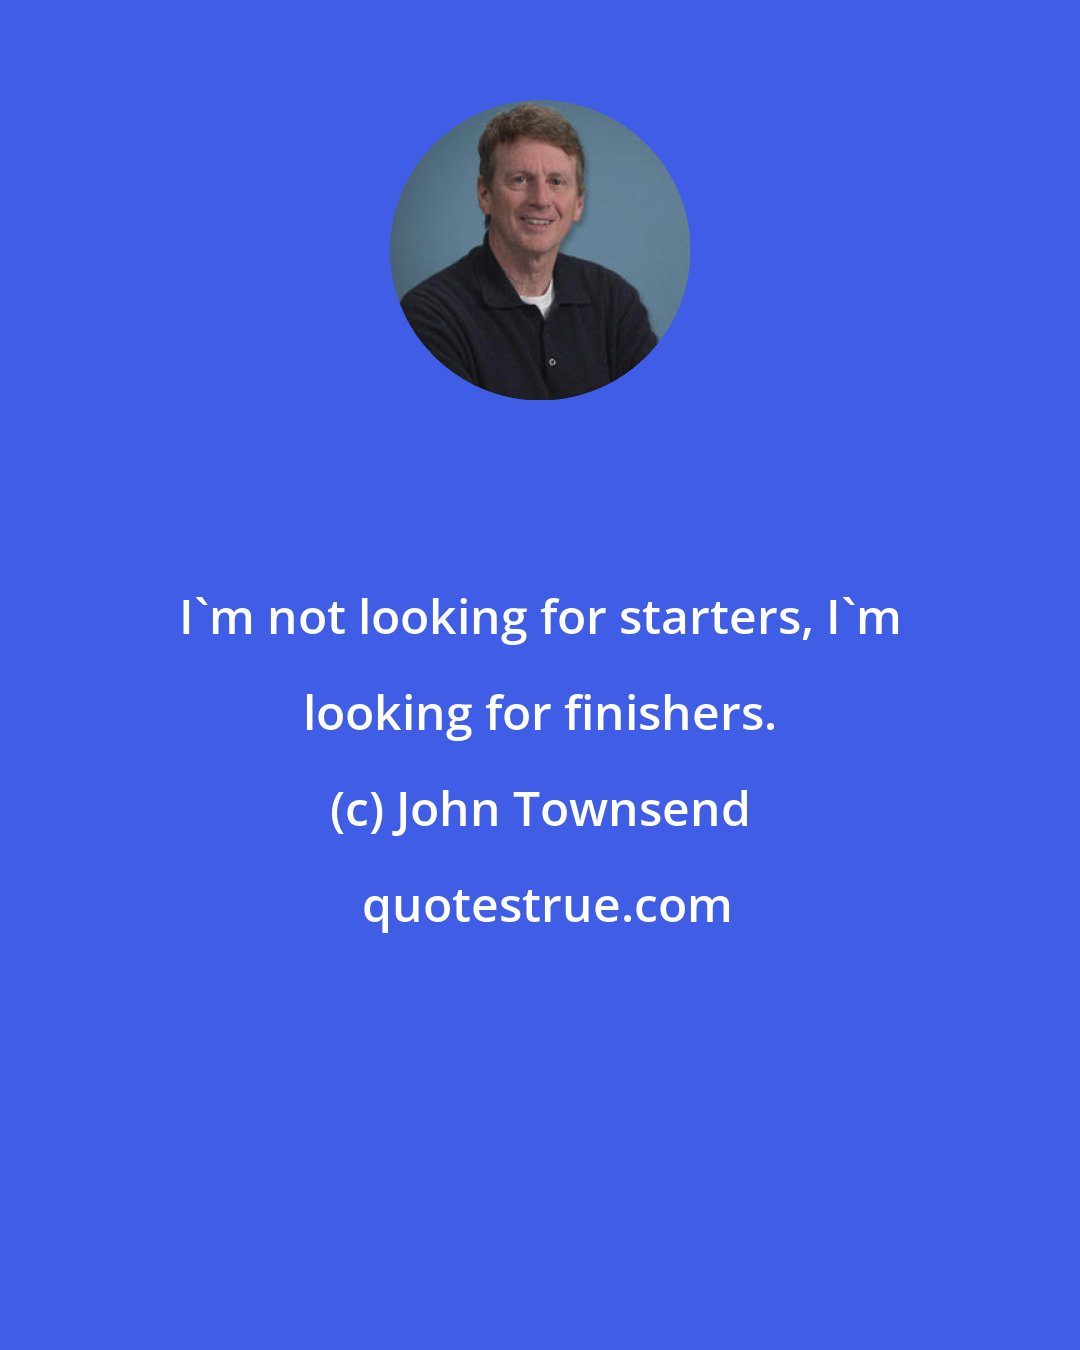 John Townsend: I'm not looking for starters, I'm looking for finishers.